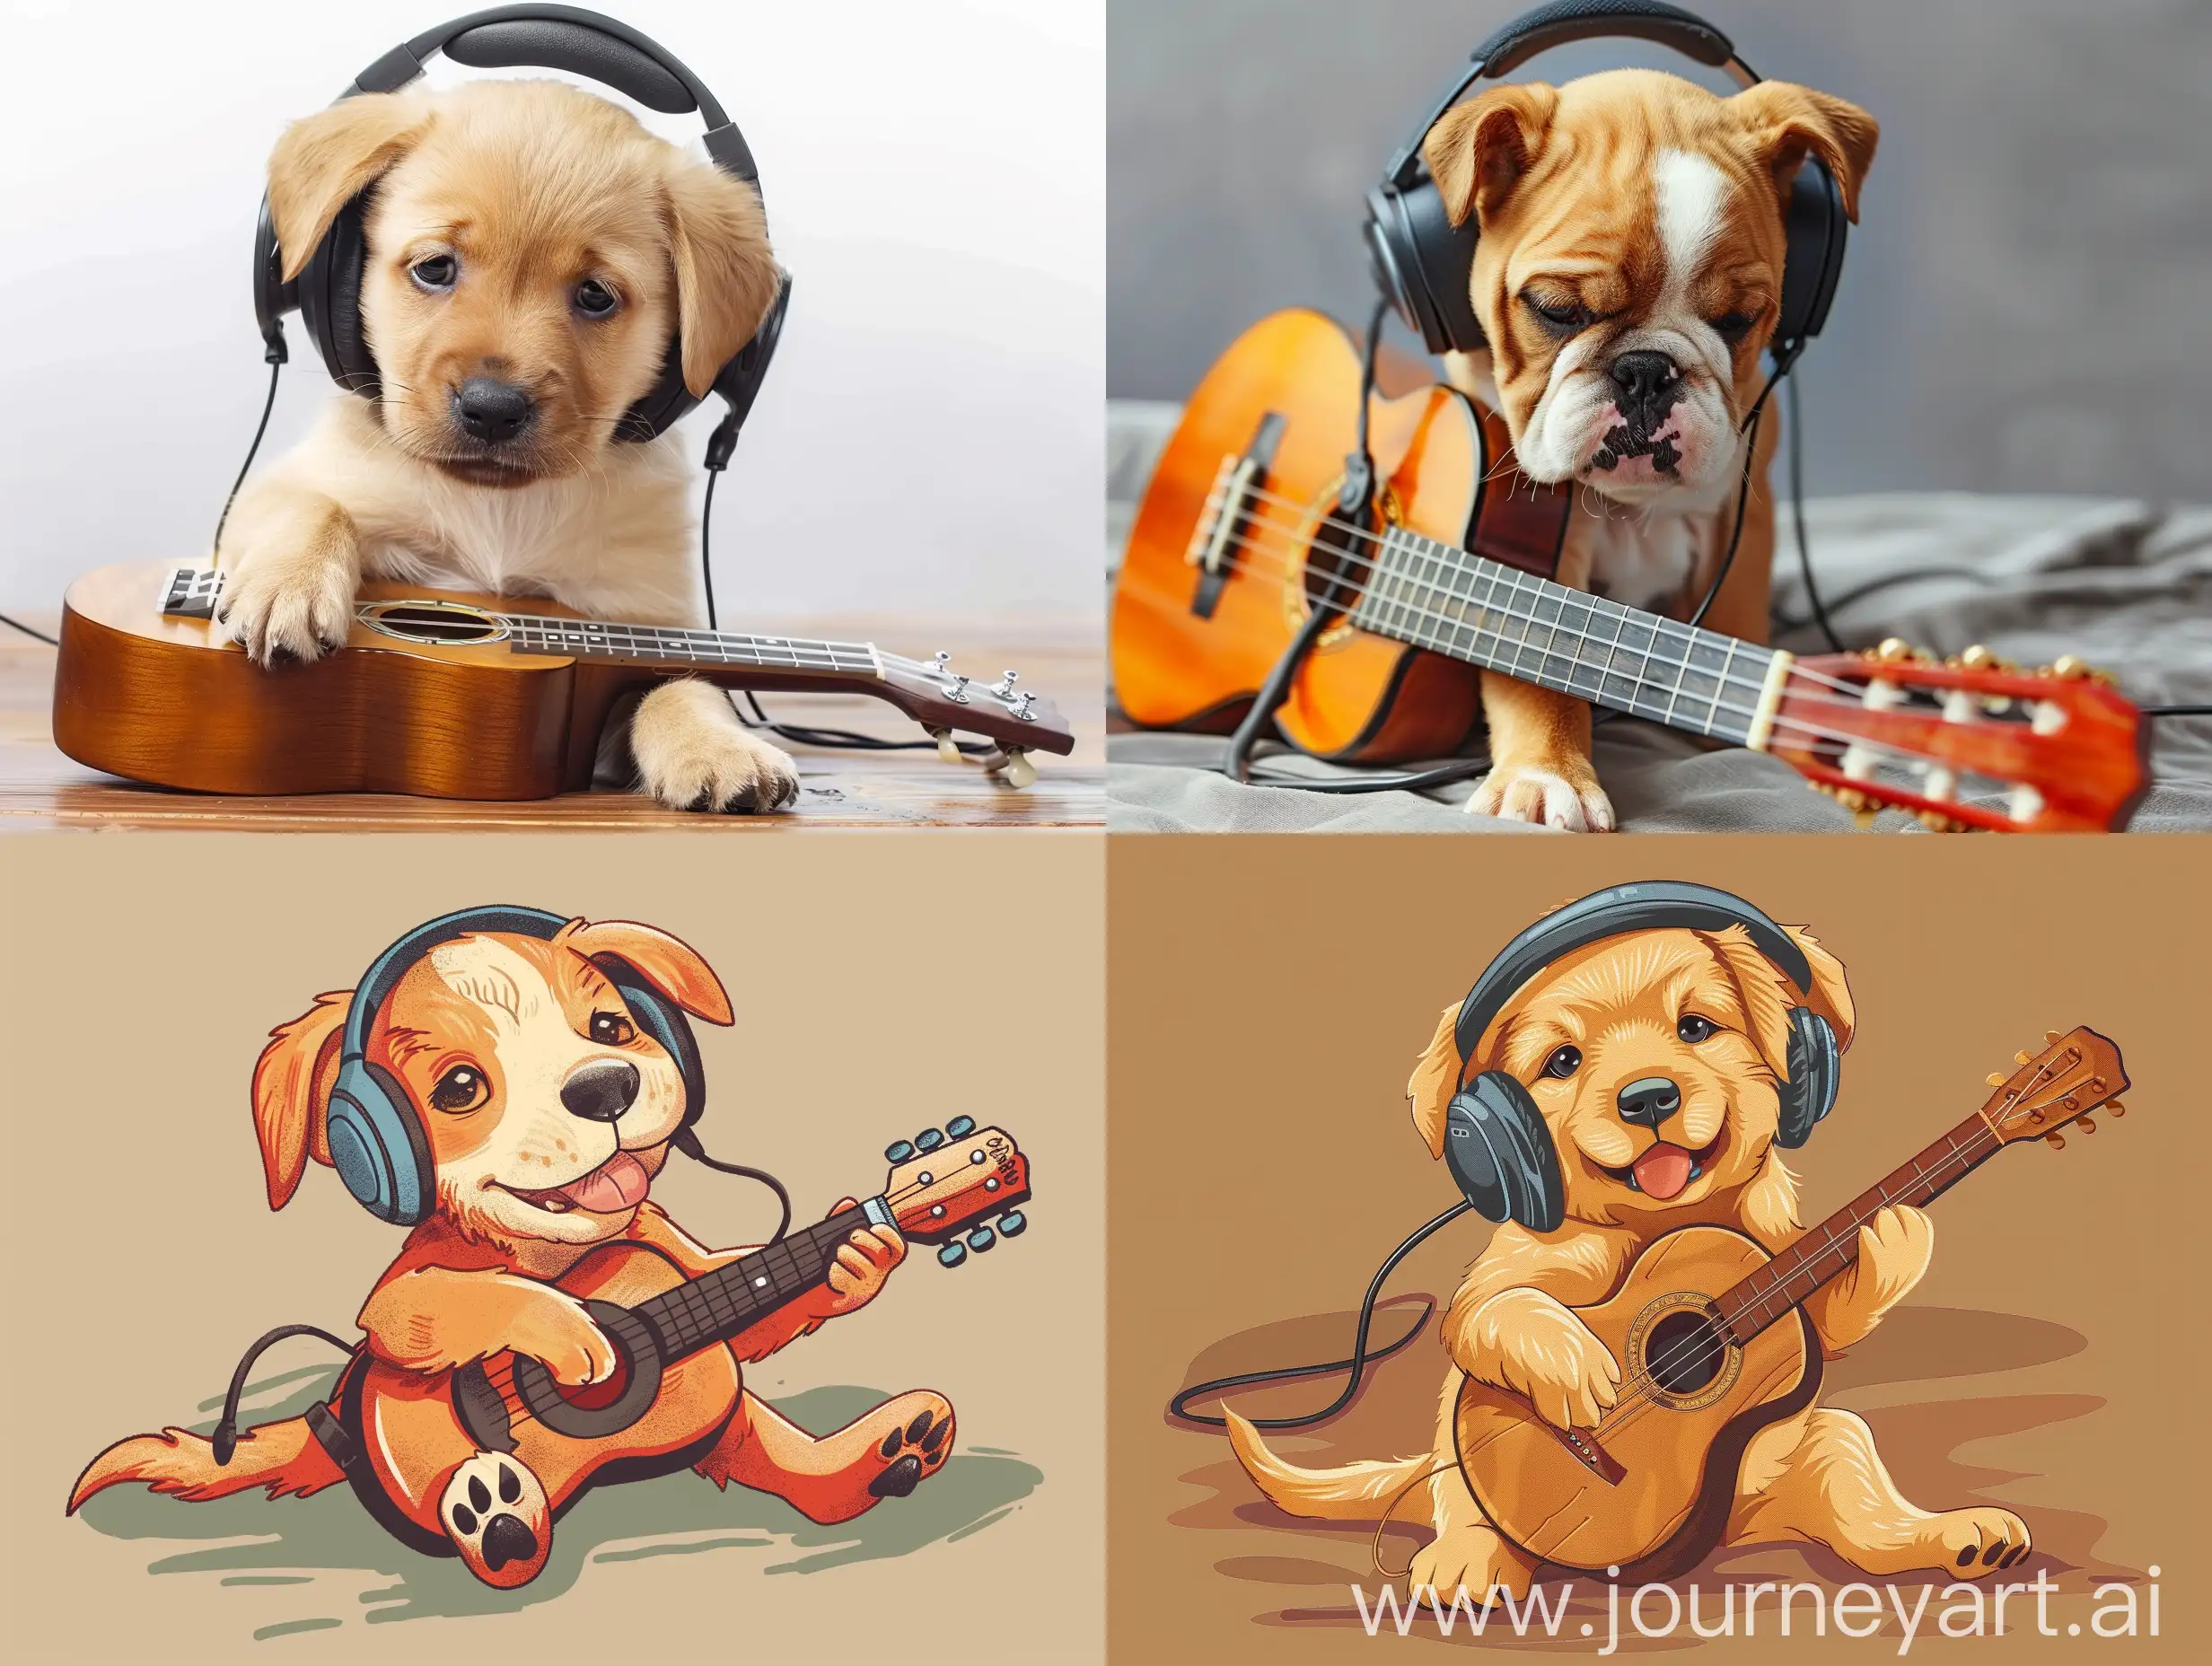 Adorable-Puppy-Playing-Guitar-with-Headphones-On